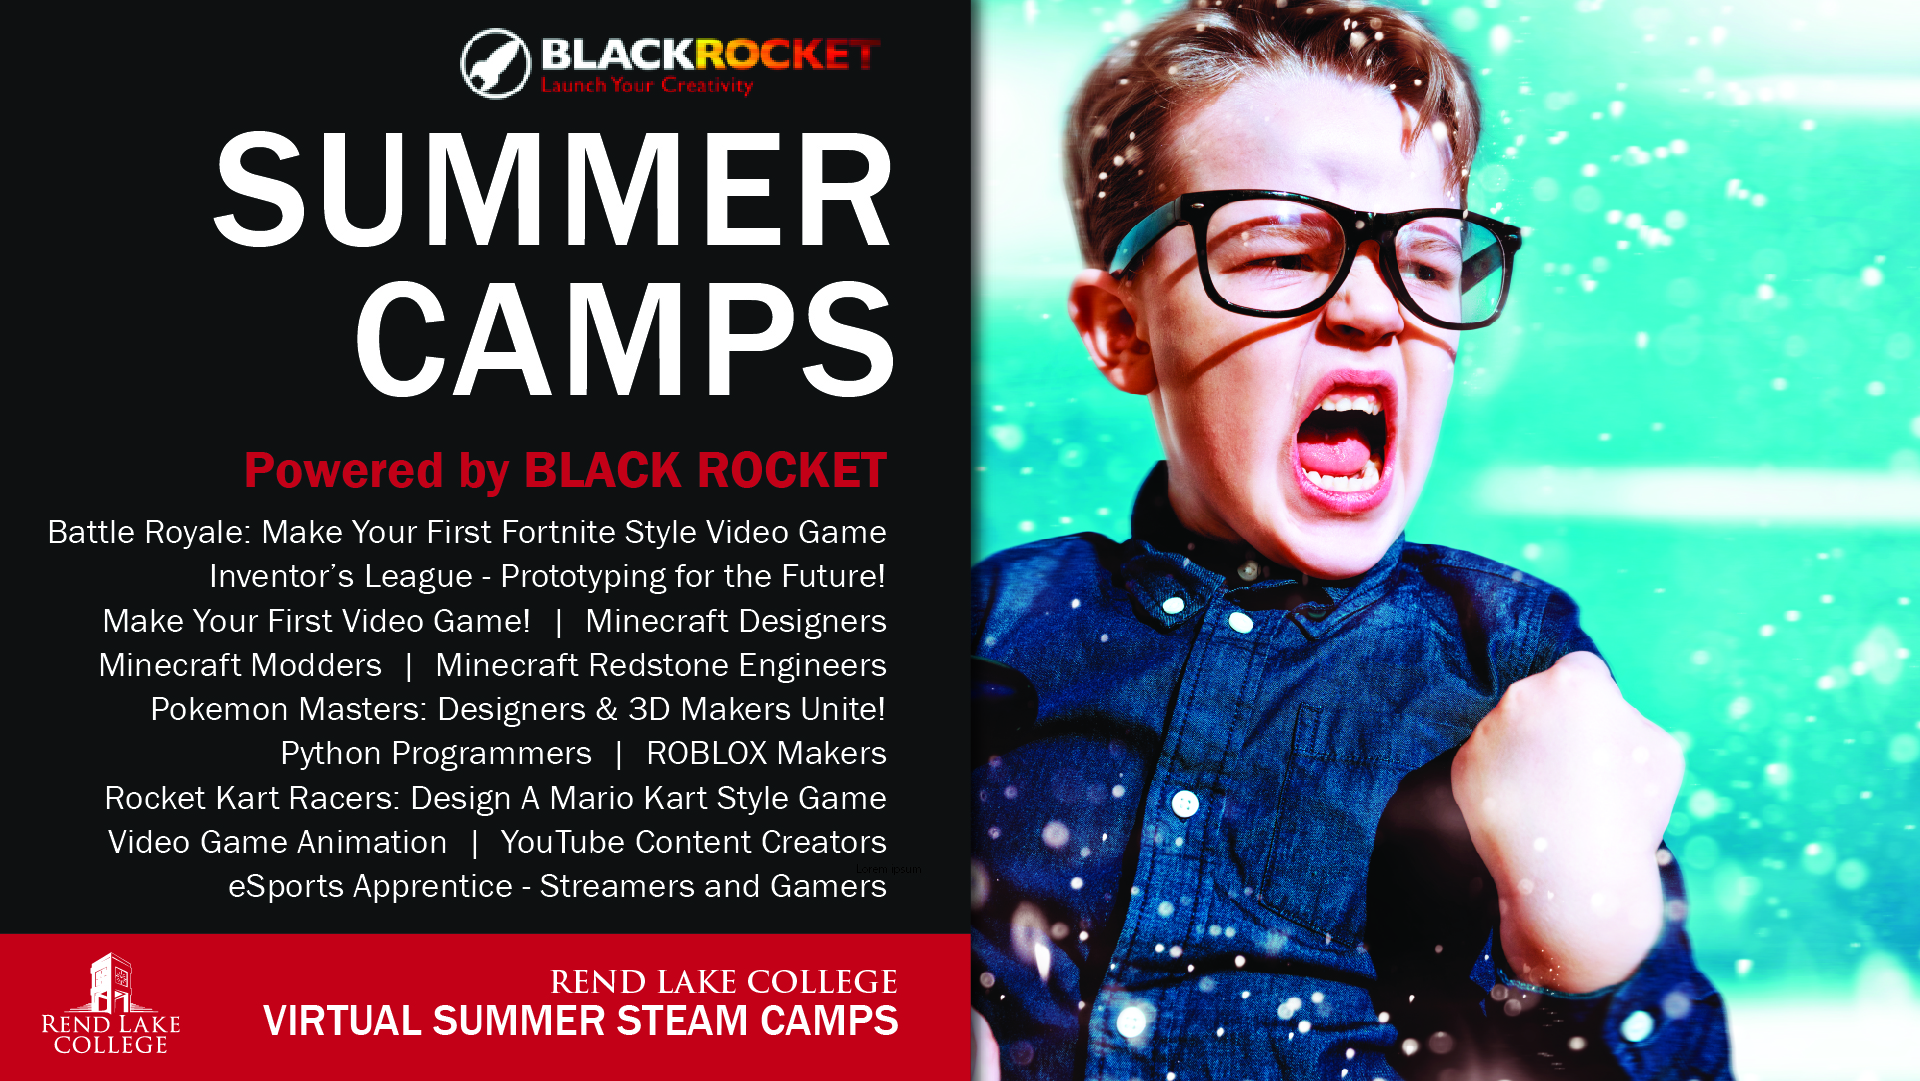 Sign Up For Virtual Kids Camps At Rlc Rend Lake College - roblox makers black rocket launch your creativity